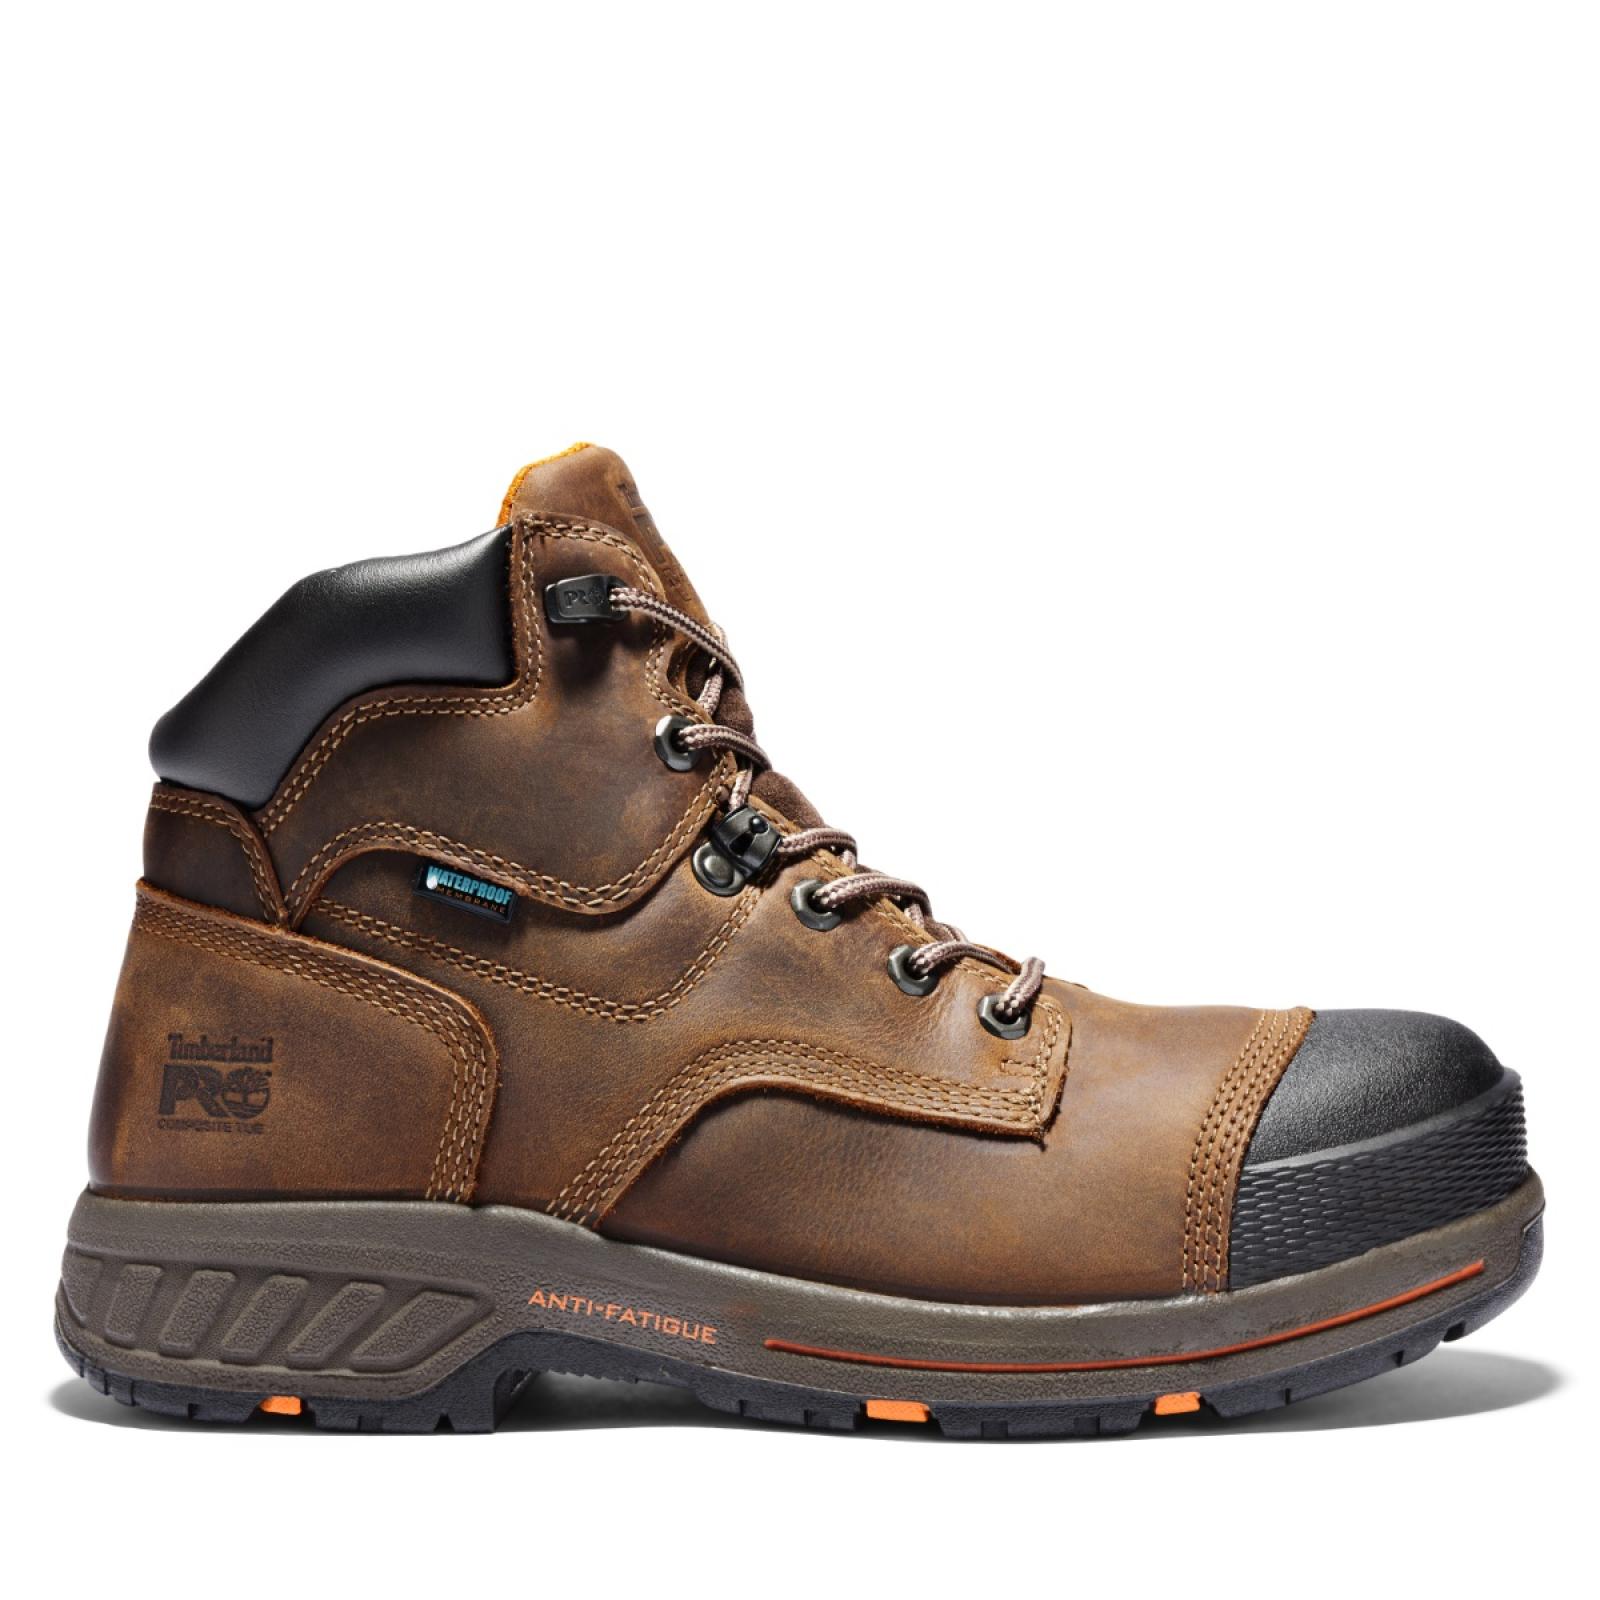 Timberland PRO Men's Helix HD 6" Composite Toe Work Boots